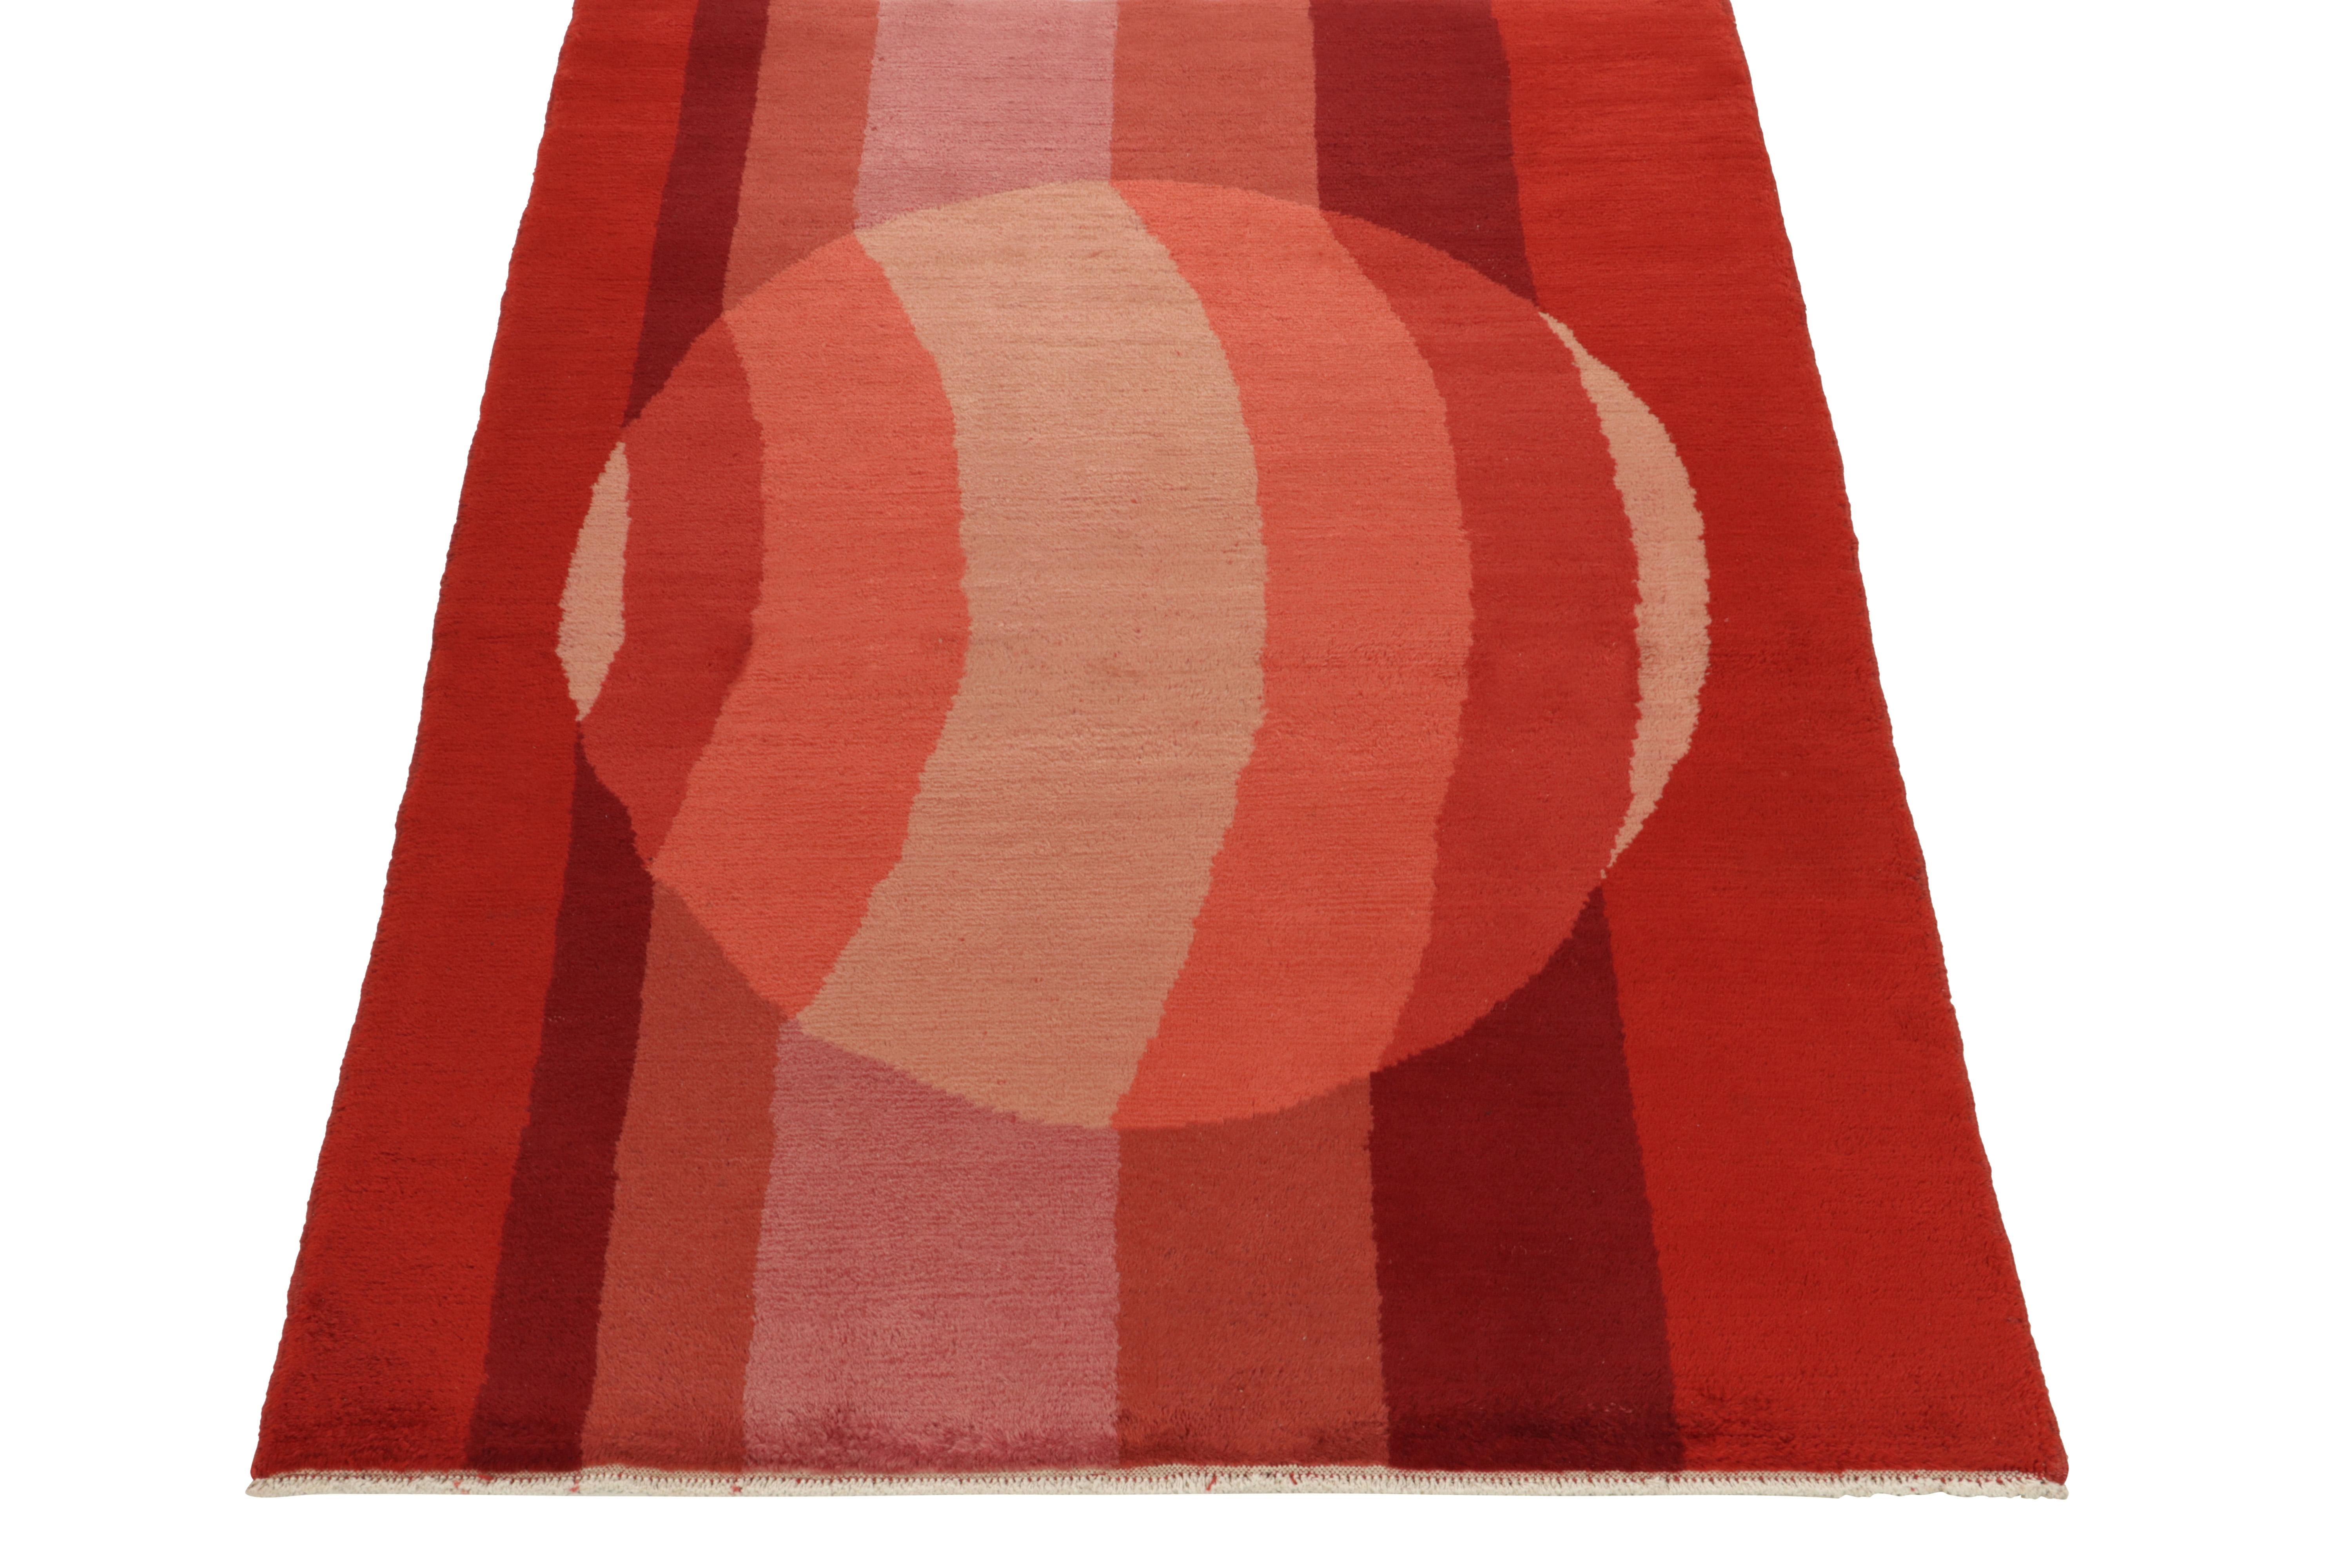 Hand-knotted in all wool, a vintage rug from Turkey circa 1970-1980 carrying a uniquely modern approach for its time. Playing a Deco linear sensibility with abstract dimensionality, the vision portrays an effect similar to the one cast with a